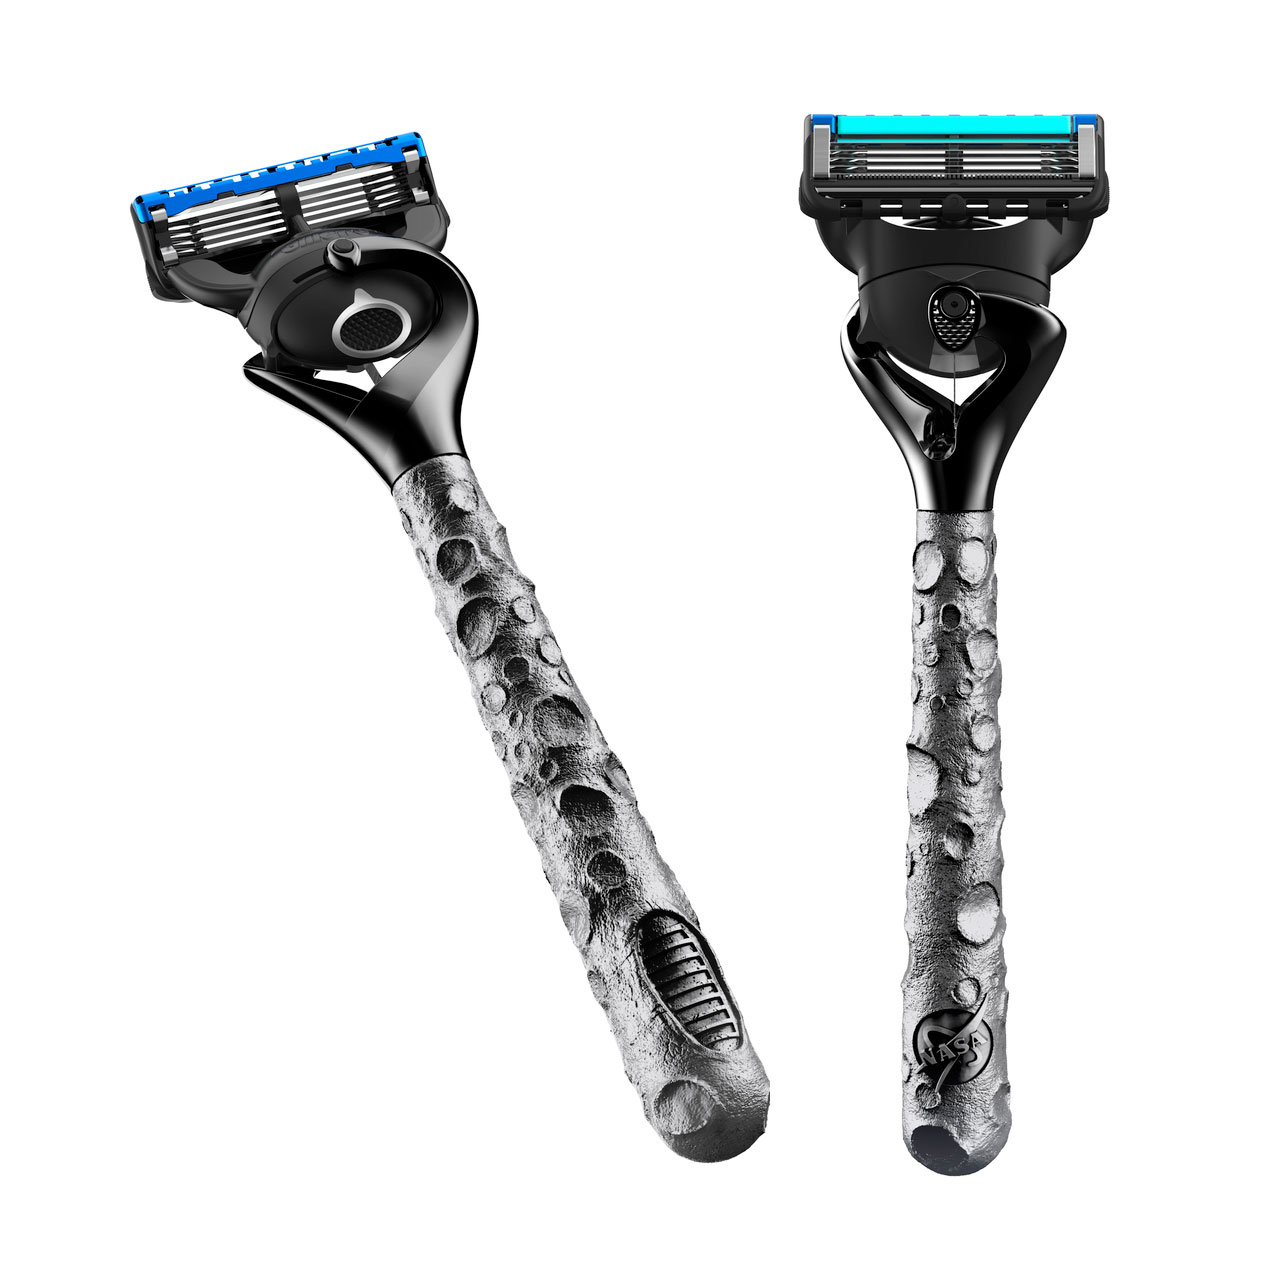 Gillette Apollo Collection Razor Inspired By First Moon Landing Mission Collectspace